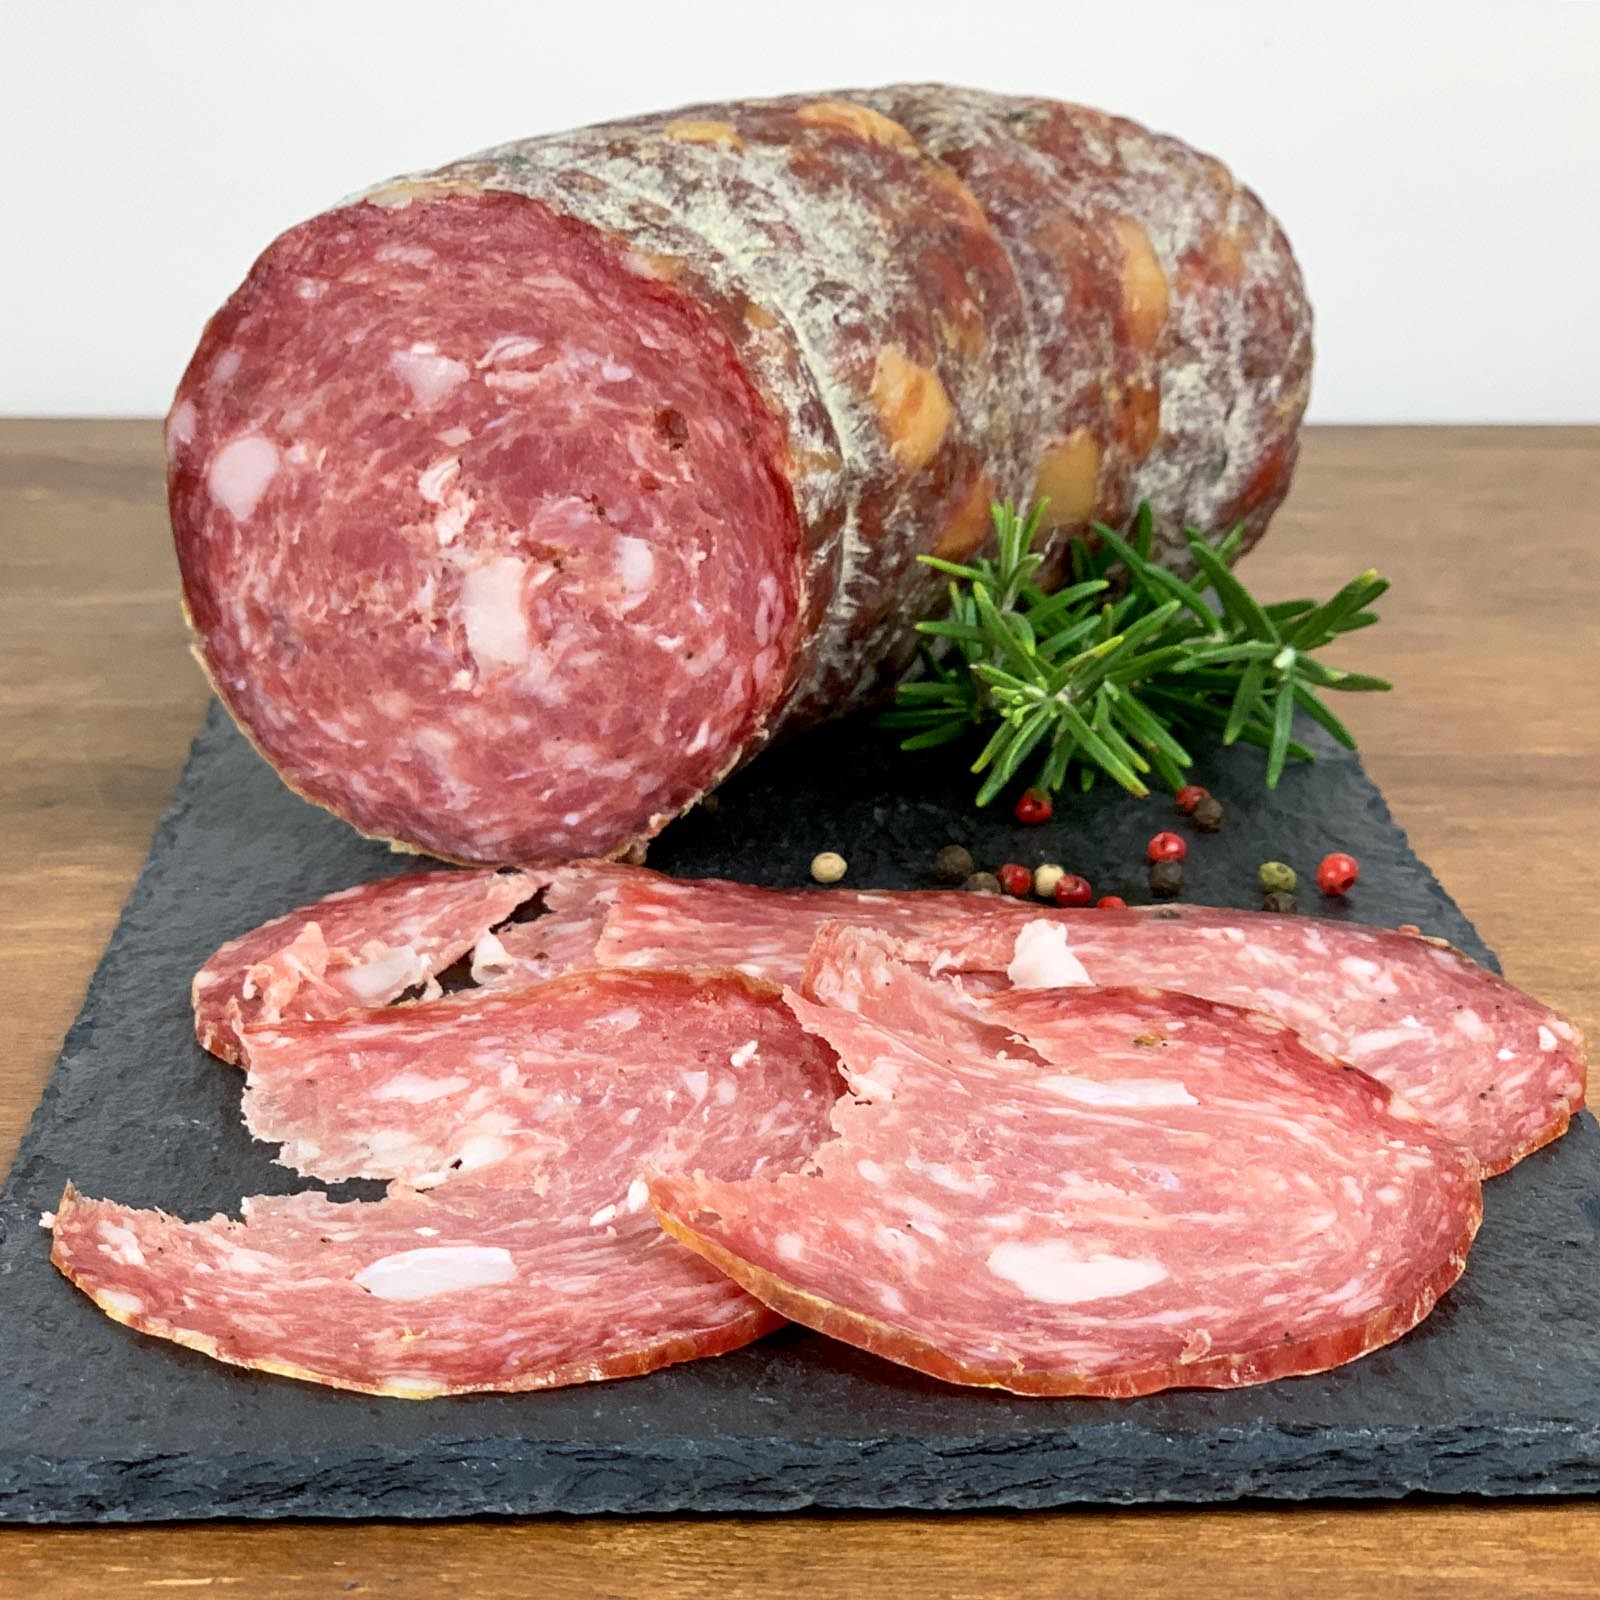 Tuscan Salami is an artisanal sausage typical of the Tuscan gastronomic tradition, made according to an ancient recipe handed down for centuries. It is characterized by a soft and compact consistency, bright red color and a particularly intense taste, enriched with spices and aromas. This version of Tuscan Salami has a net weight of about 1 kg, is vacuum packed and is characterized by a large slice of about 10 centimeters in diameter.